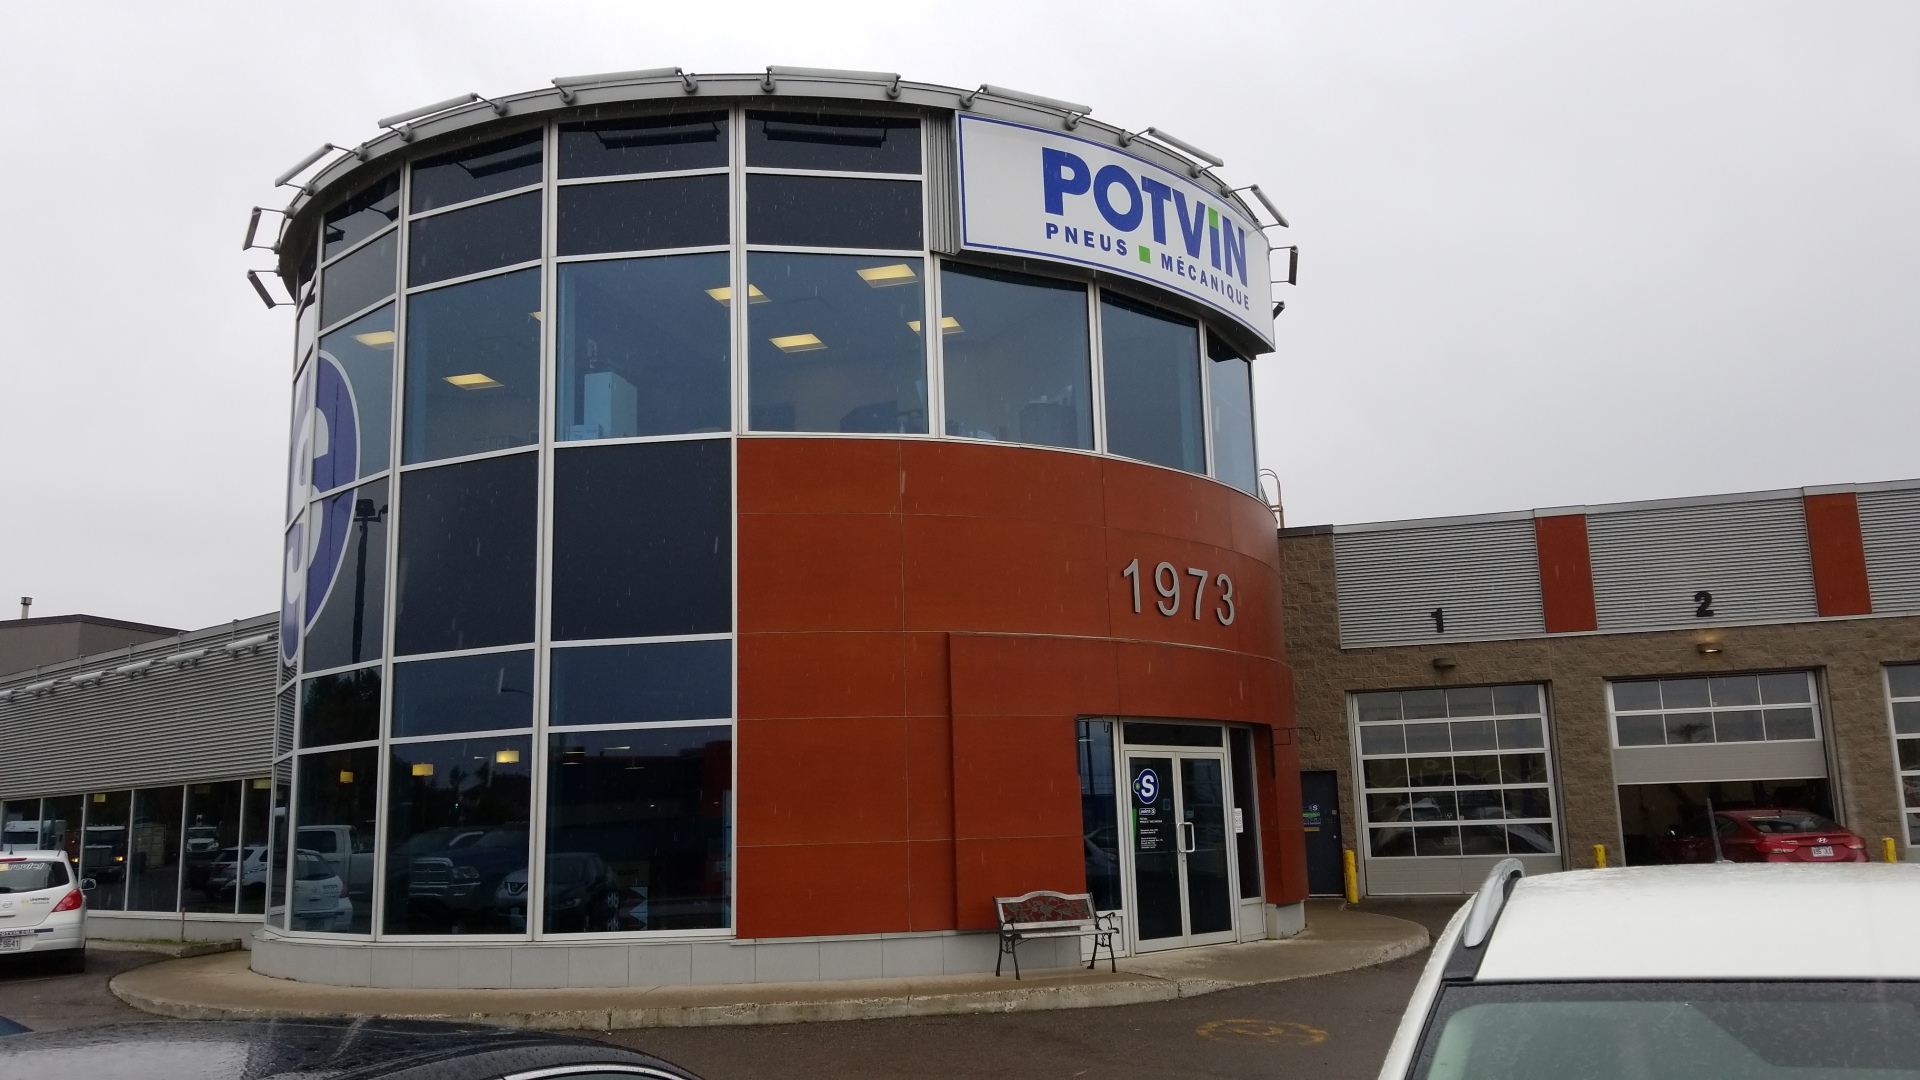 Point S - Tires And Mechanical Service Inc. Potvin